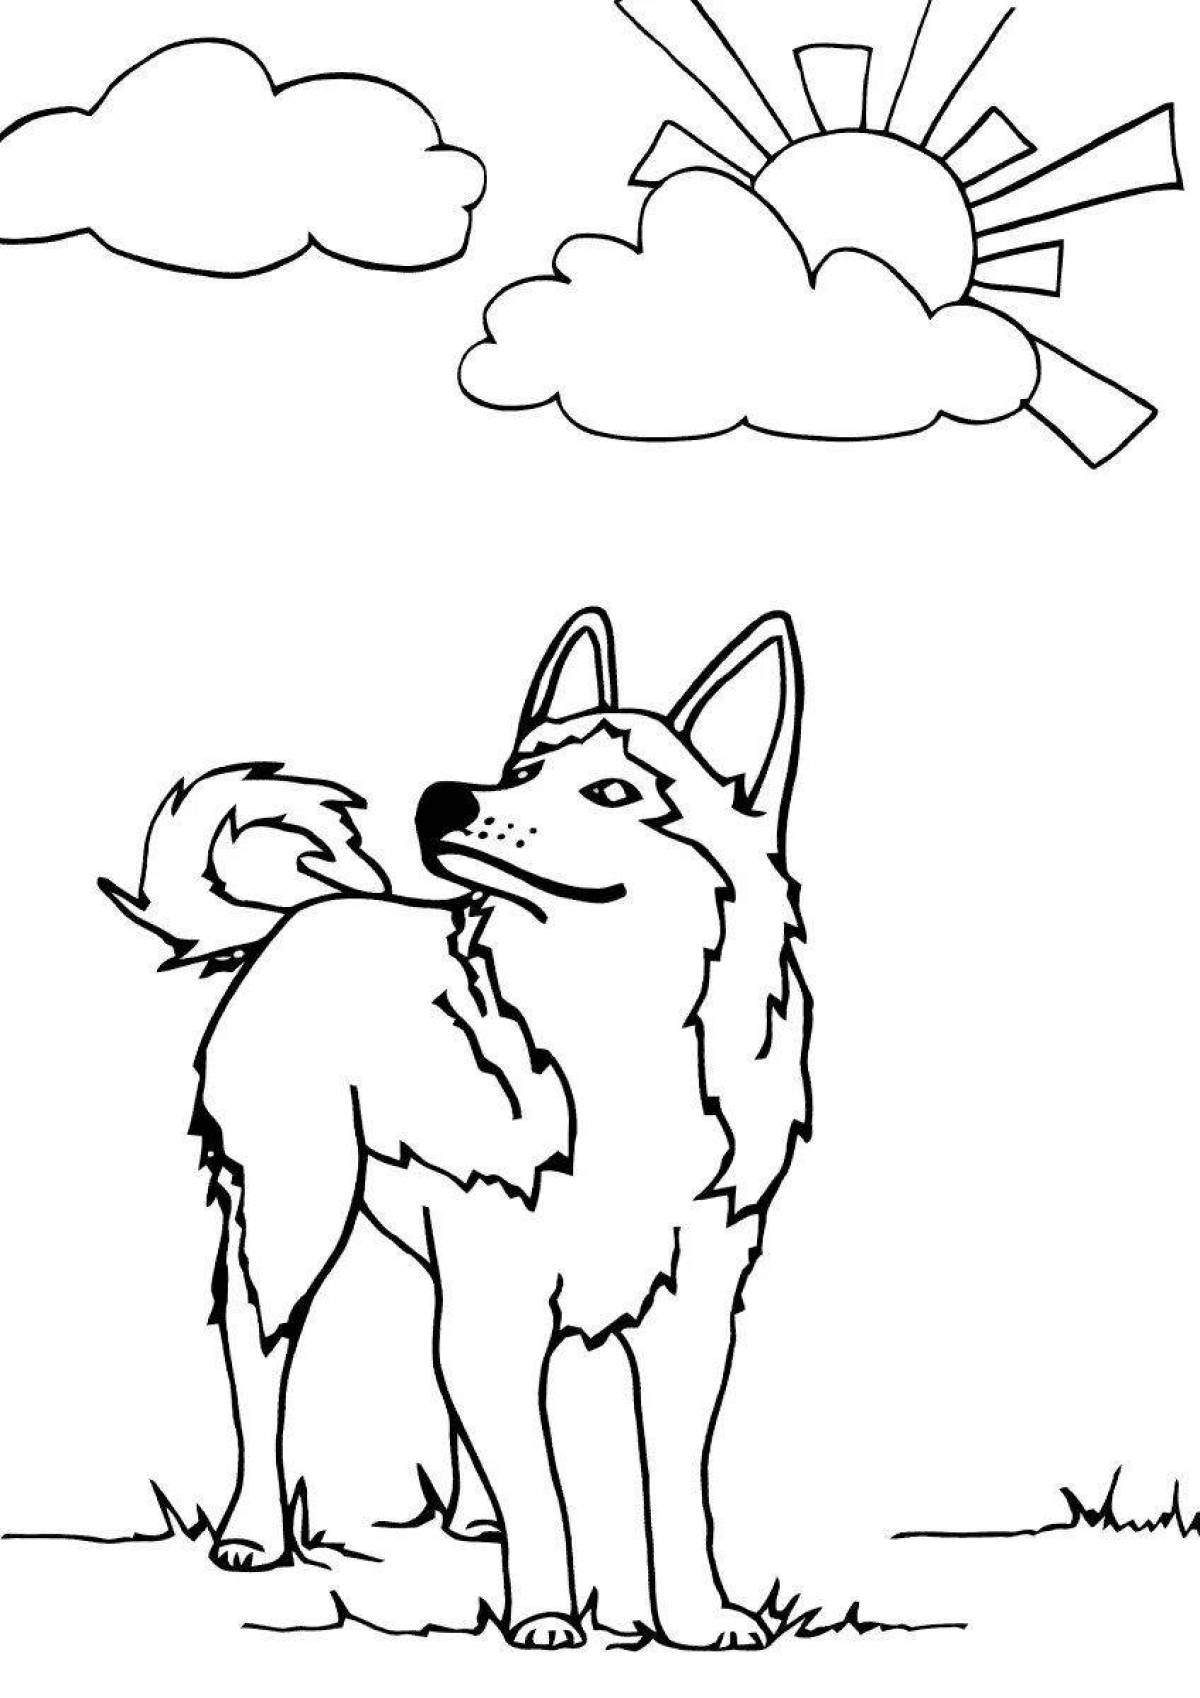 Intriguing husky coloring book for kids